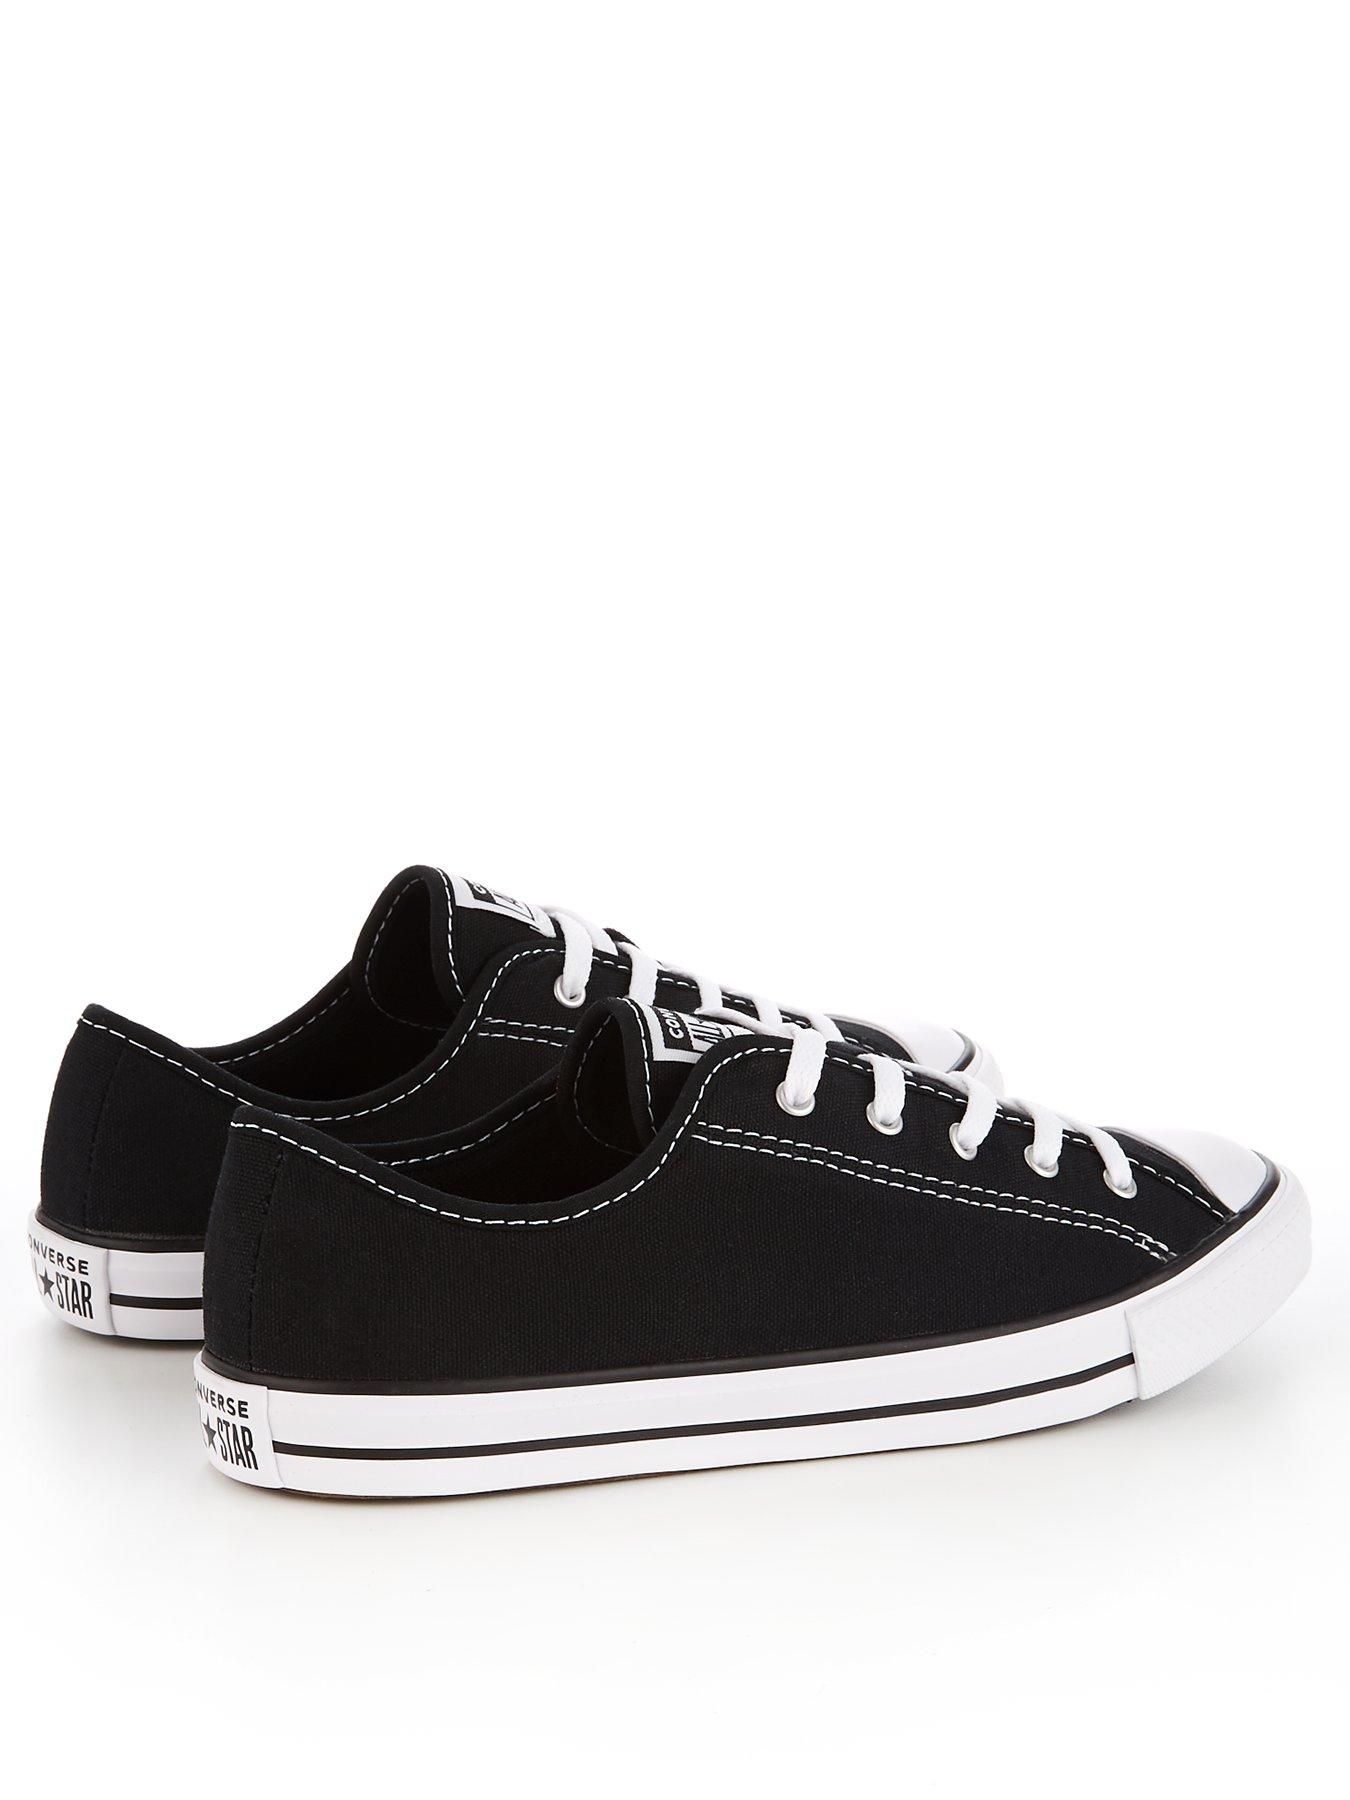 Converse Women's Taylor All Star Dainty Trainers - BLACK | very.co.uk